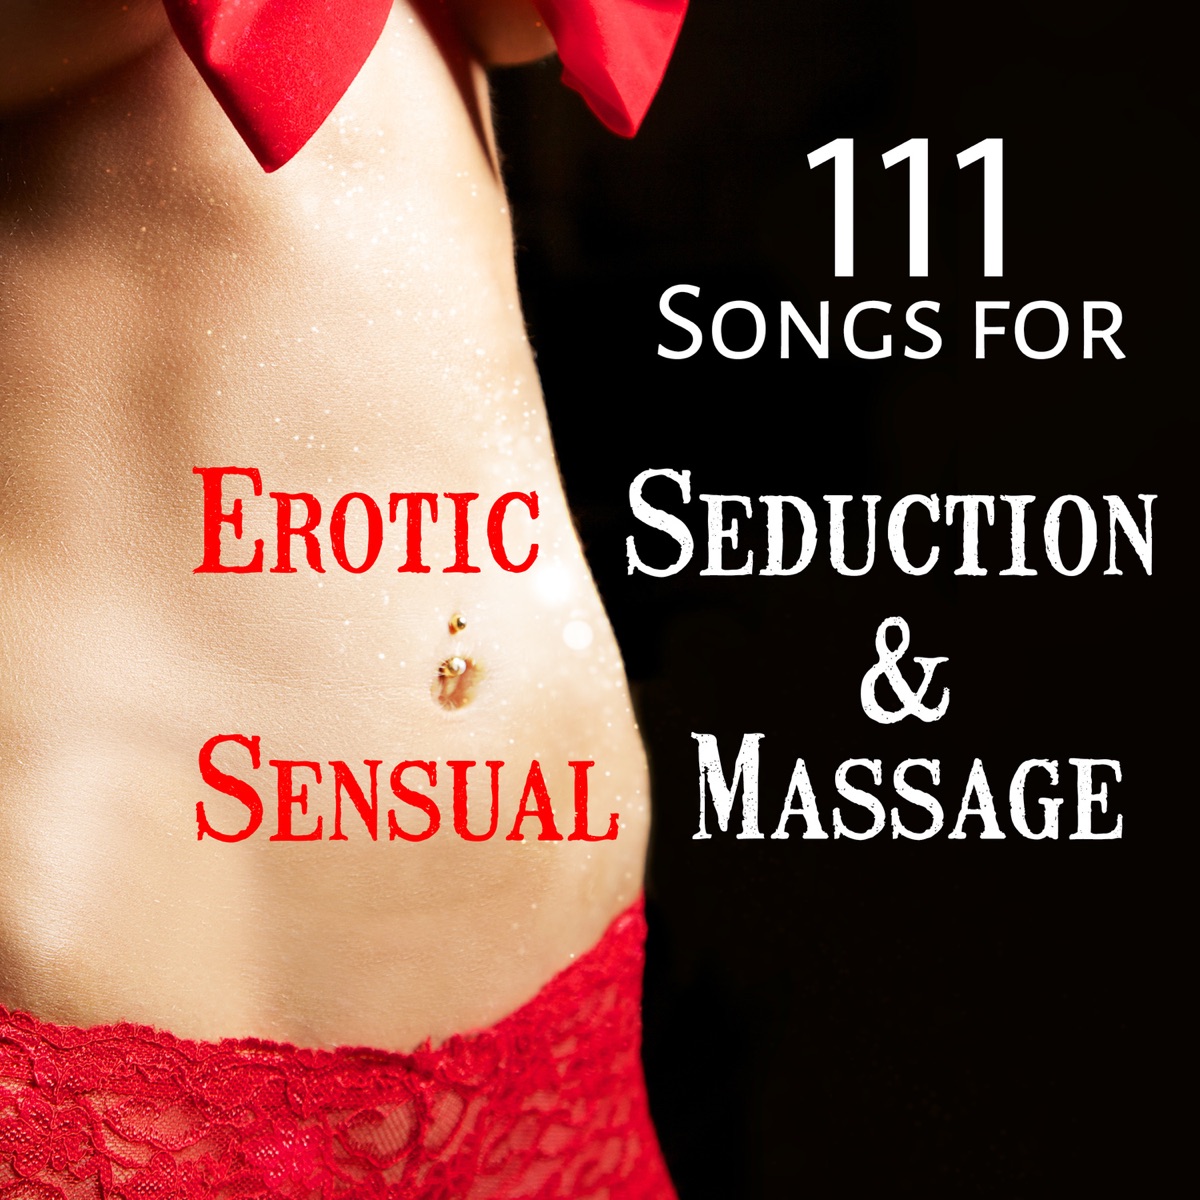 111 Songs for Erotic Seduction and Sensual Massage Tantric Music for Meditation, Sexuality, Fantasy, Relaxation, Intimate Moments, Energy Stimulation - Album by Love Romance Music Zone